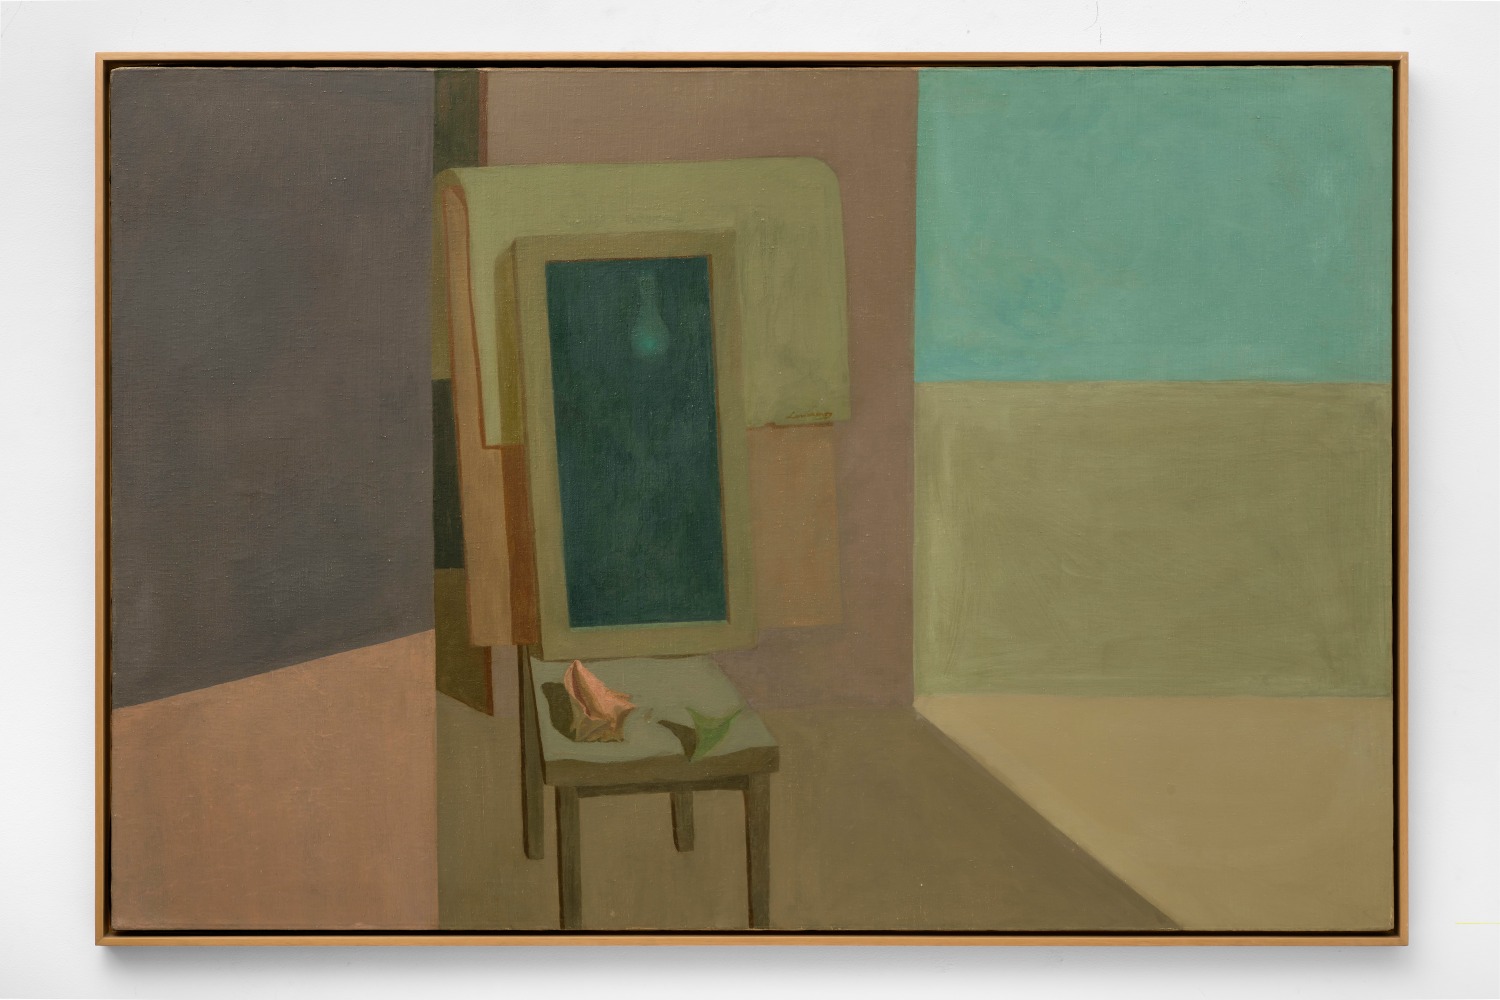 Helen Lundeberg (1908-1999)
The Mirror, (The Mirror III or The Mirror and Pink Shell), 1956&amp;nbsp;&amp;nbsp;&amp;nbsp;&amp;nbsp;
oil on canvas
40 x 60 inches;&amp;nbsp;&amp;nbsp;101.6 x 152.4 centimeters
LSFA# 15280